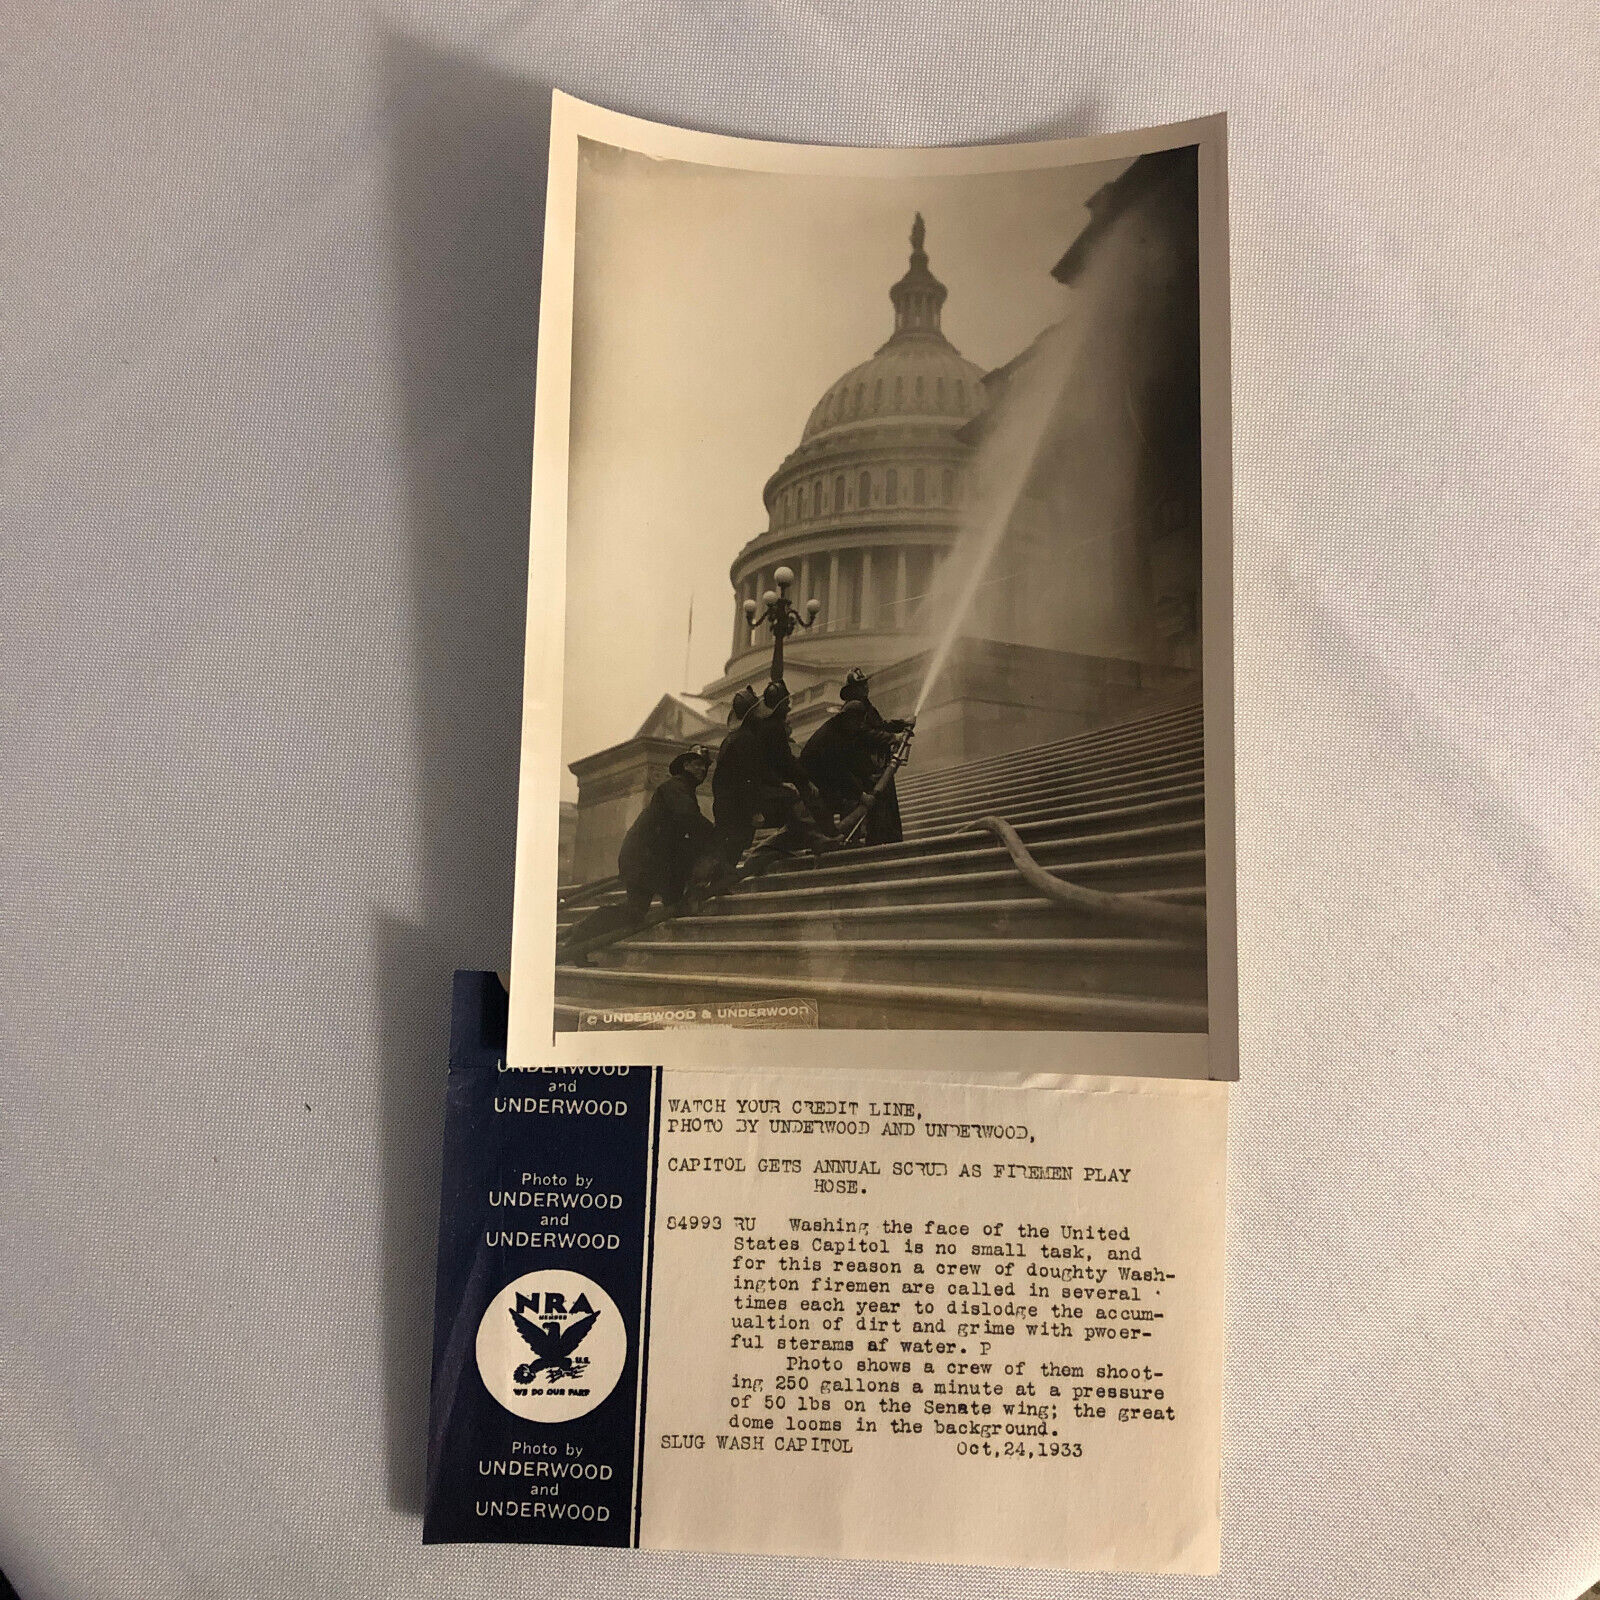 Press Photo Photograph Fireman Cleaning US Capitol Building 1933 Underwood Fire